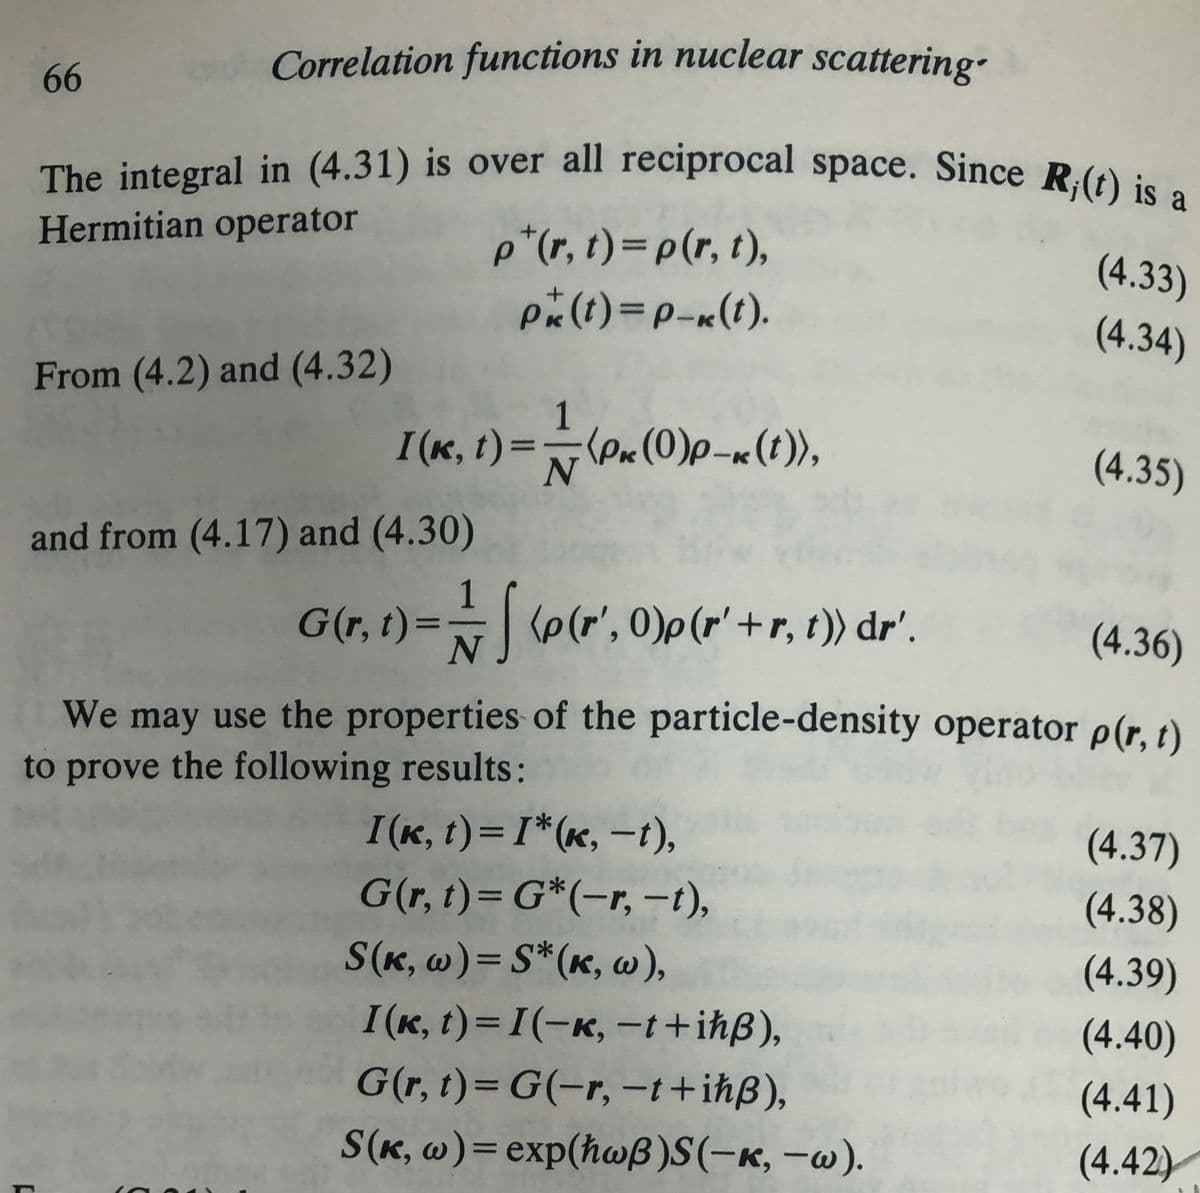 Correlation functions in nuclear scattering-
66
The integral in (4.31) is over all reciprocal space. Since R,(t) is a
Hermitian operator
p+(r,t) = p(r,t),
(4.33)
P(t)=P-(t).
(4.34)
From (4.2) and (4.32)
N
(4.35)
I(k, t)=(Pk(0)p-x(t)),
and from (4.17) and (4.30)
G(r,t) = (p(r', 0)p(r' + r, 1)) dr'.
(4.36)
We may use the properties of the particle-density operator p(r,t)
to prove the following results:
I(k,t) = I*(K, -t),
(4.37)
G(r,t)=G*(-r, -1),
(4.38)
S(K, w)= S*(K, w),
(4.39)
I(K, t)=I(-K, -t+ihẞ),
(4.40)
G(r,t)=G(-r, -t+ihẞ),
(4.41)
S(K, w)= exp(hwẞ)S(-K, -w).
(4.42)